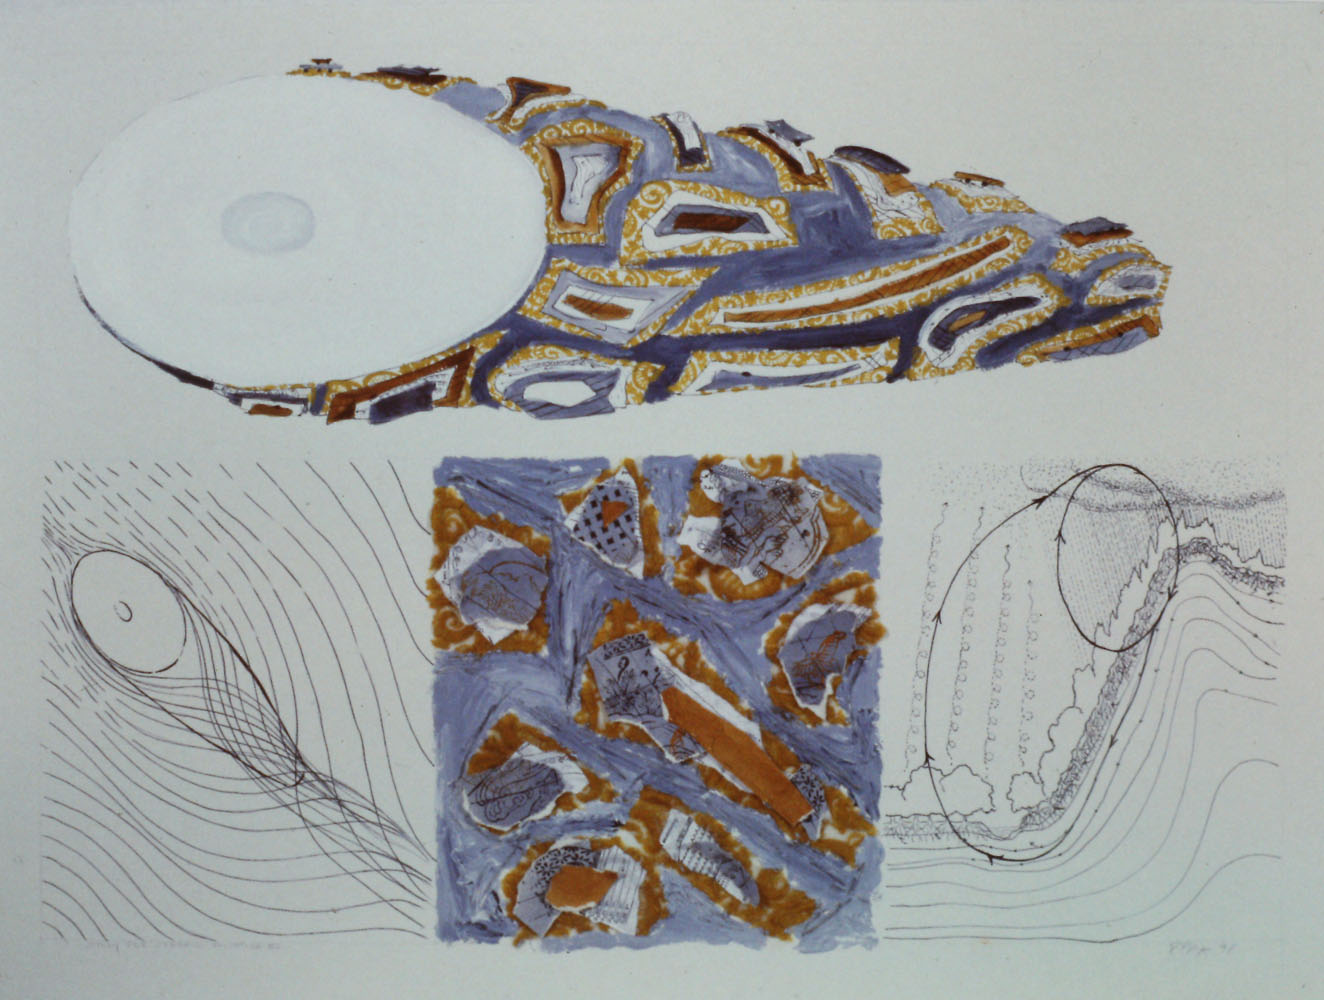    Study for Seto Swirl,  1998, 22” x 30”, mixed media and collage on paper  